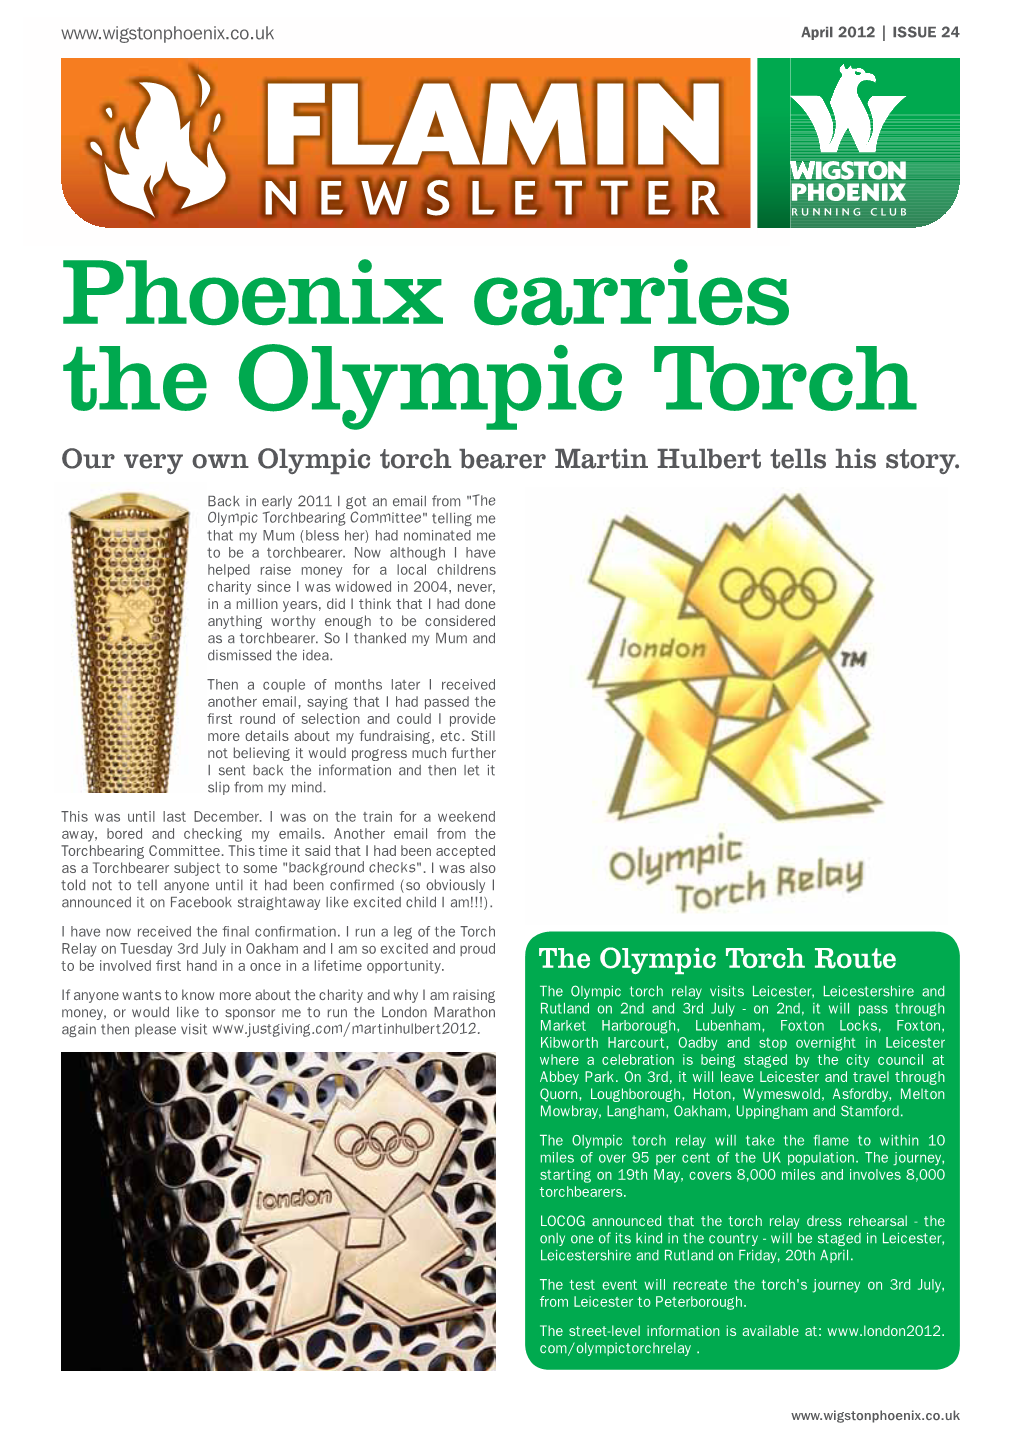 Phoenix Carries the Olympic Torch Our Very Own Olympic Torch Bearer Martin Hulbert Tells His Story